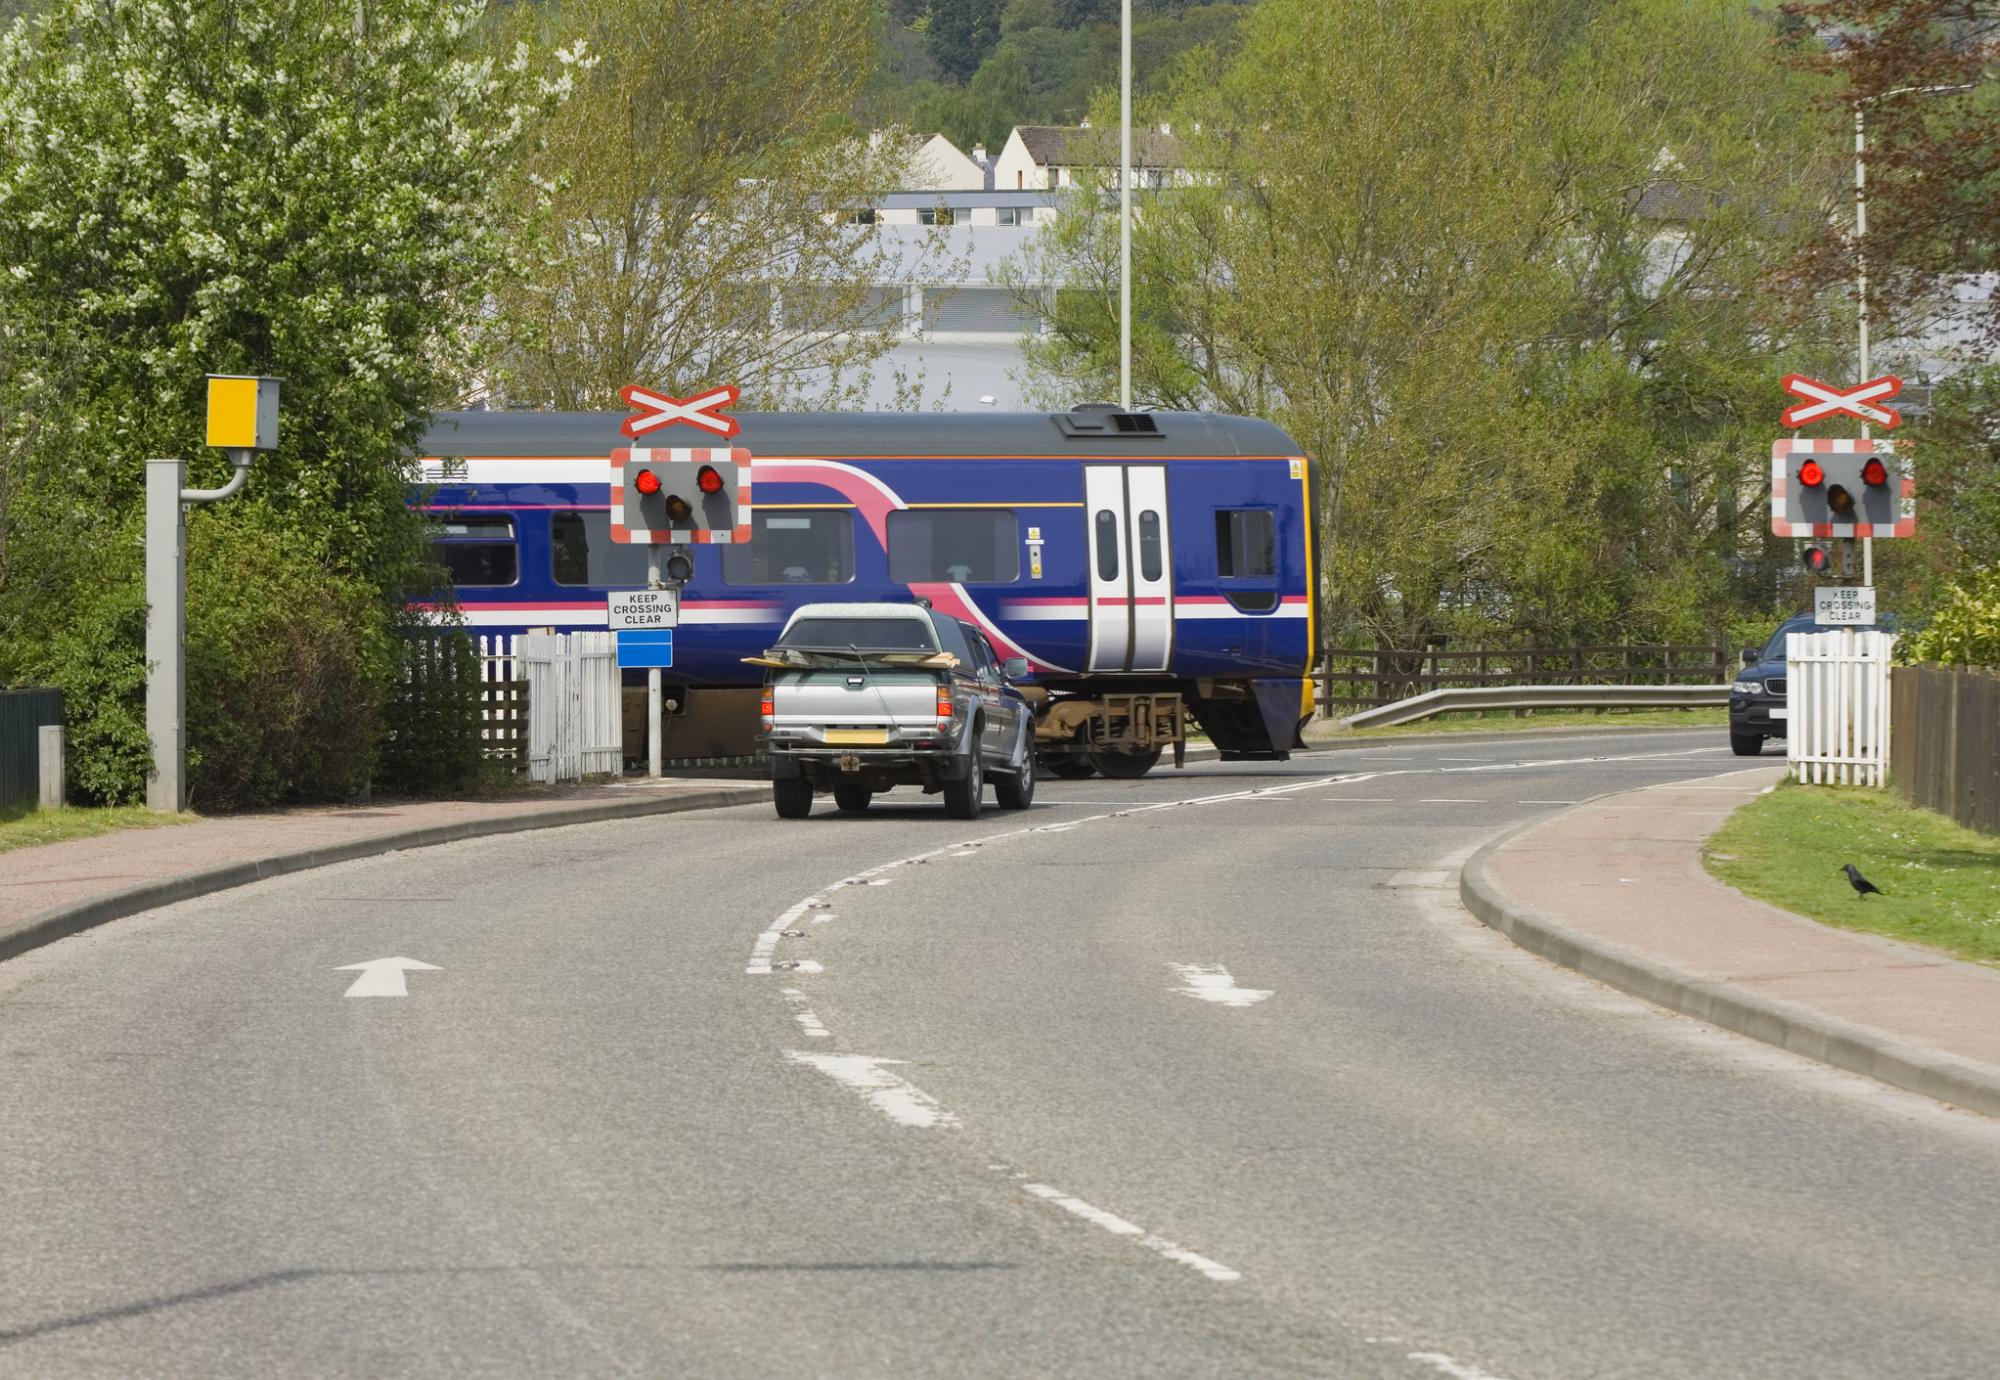 Train crossing a road at a level crossing